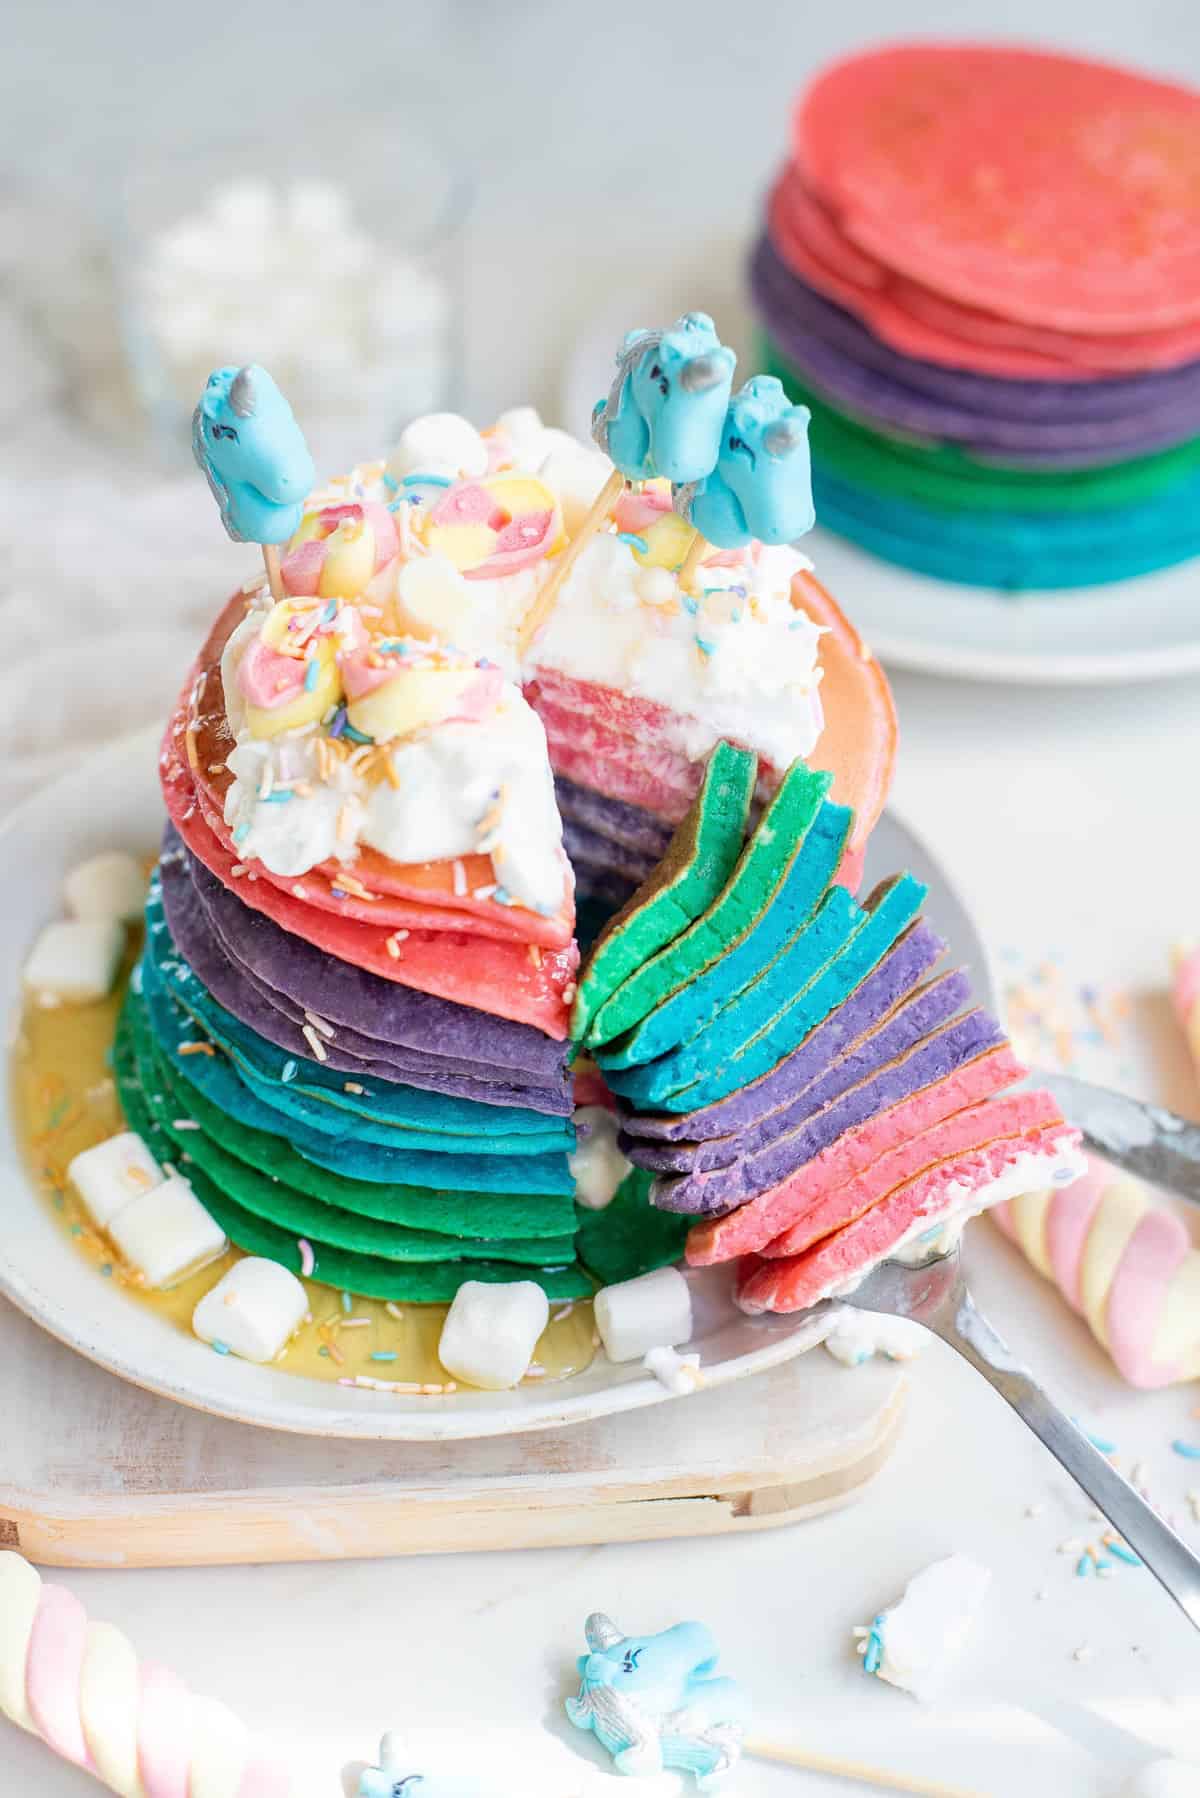 Unicorn pancakes with a slice cut out to show colors.